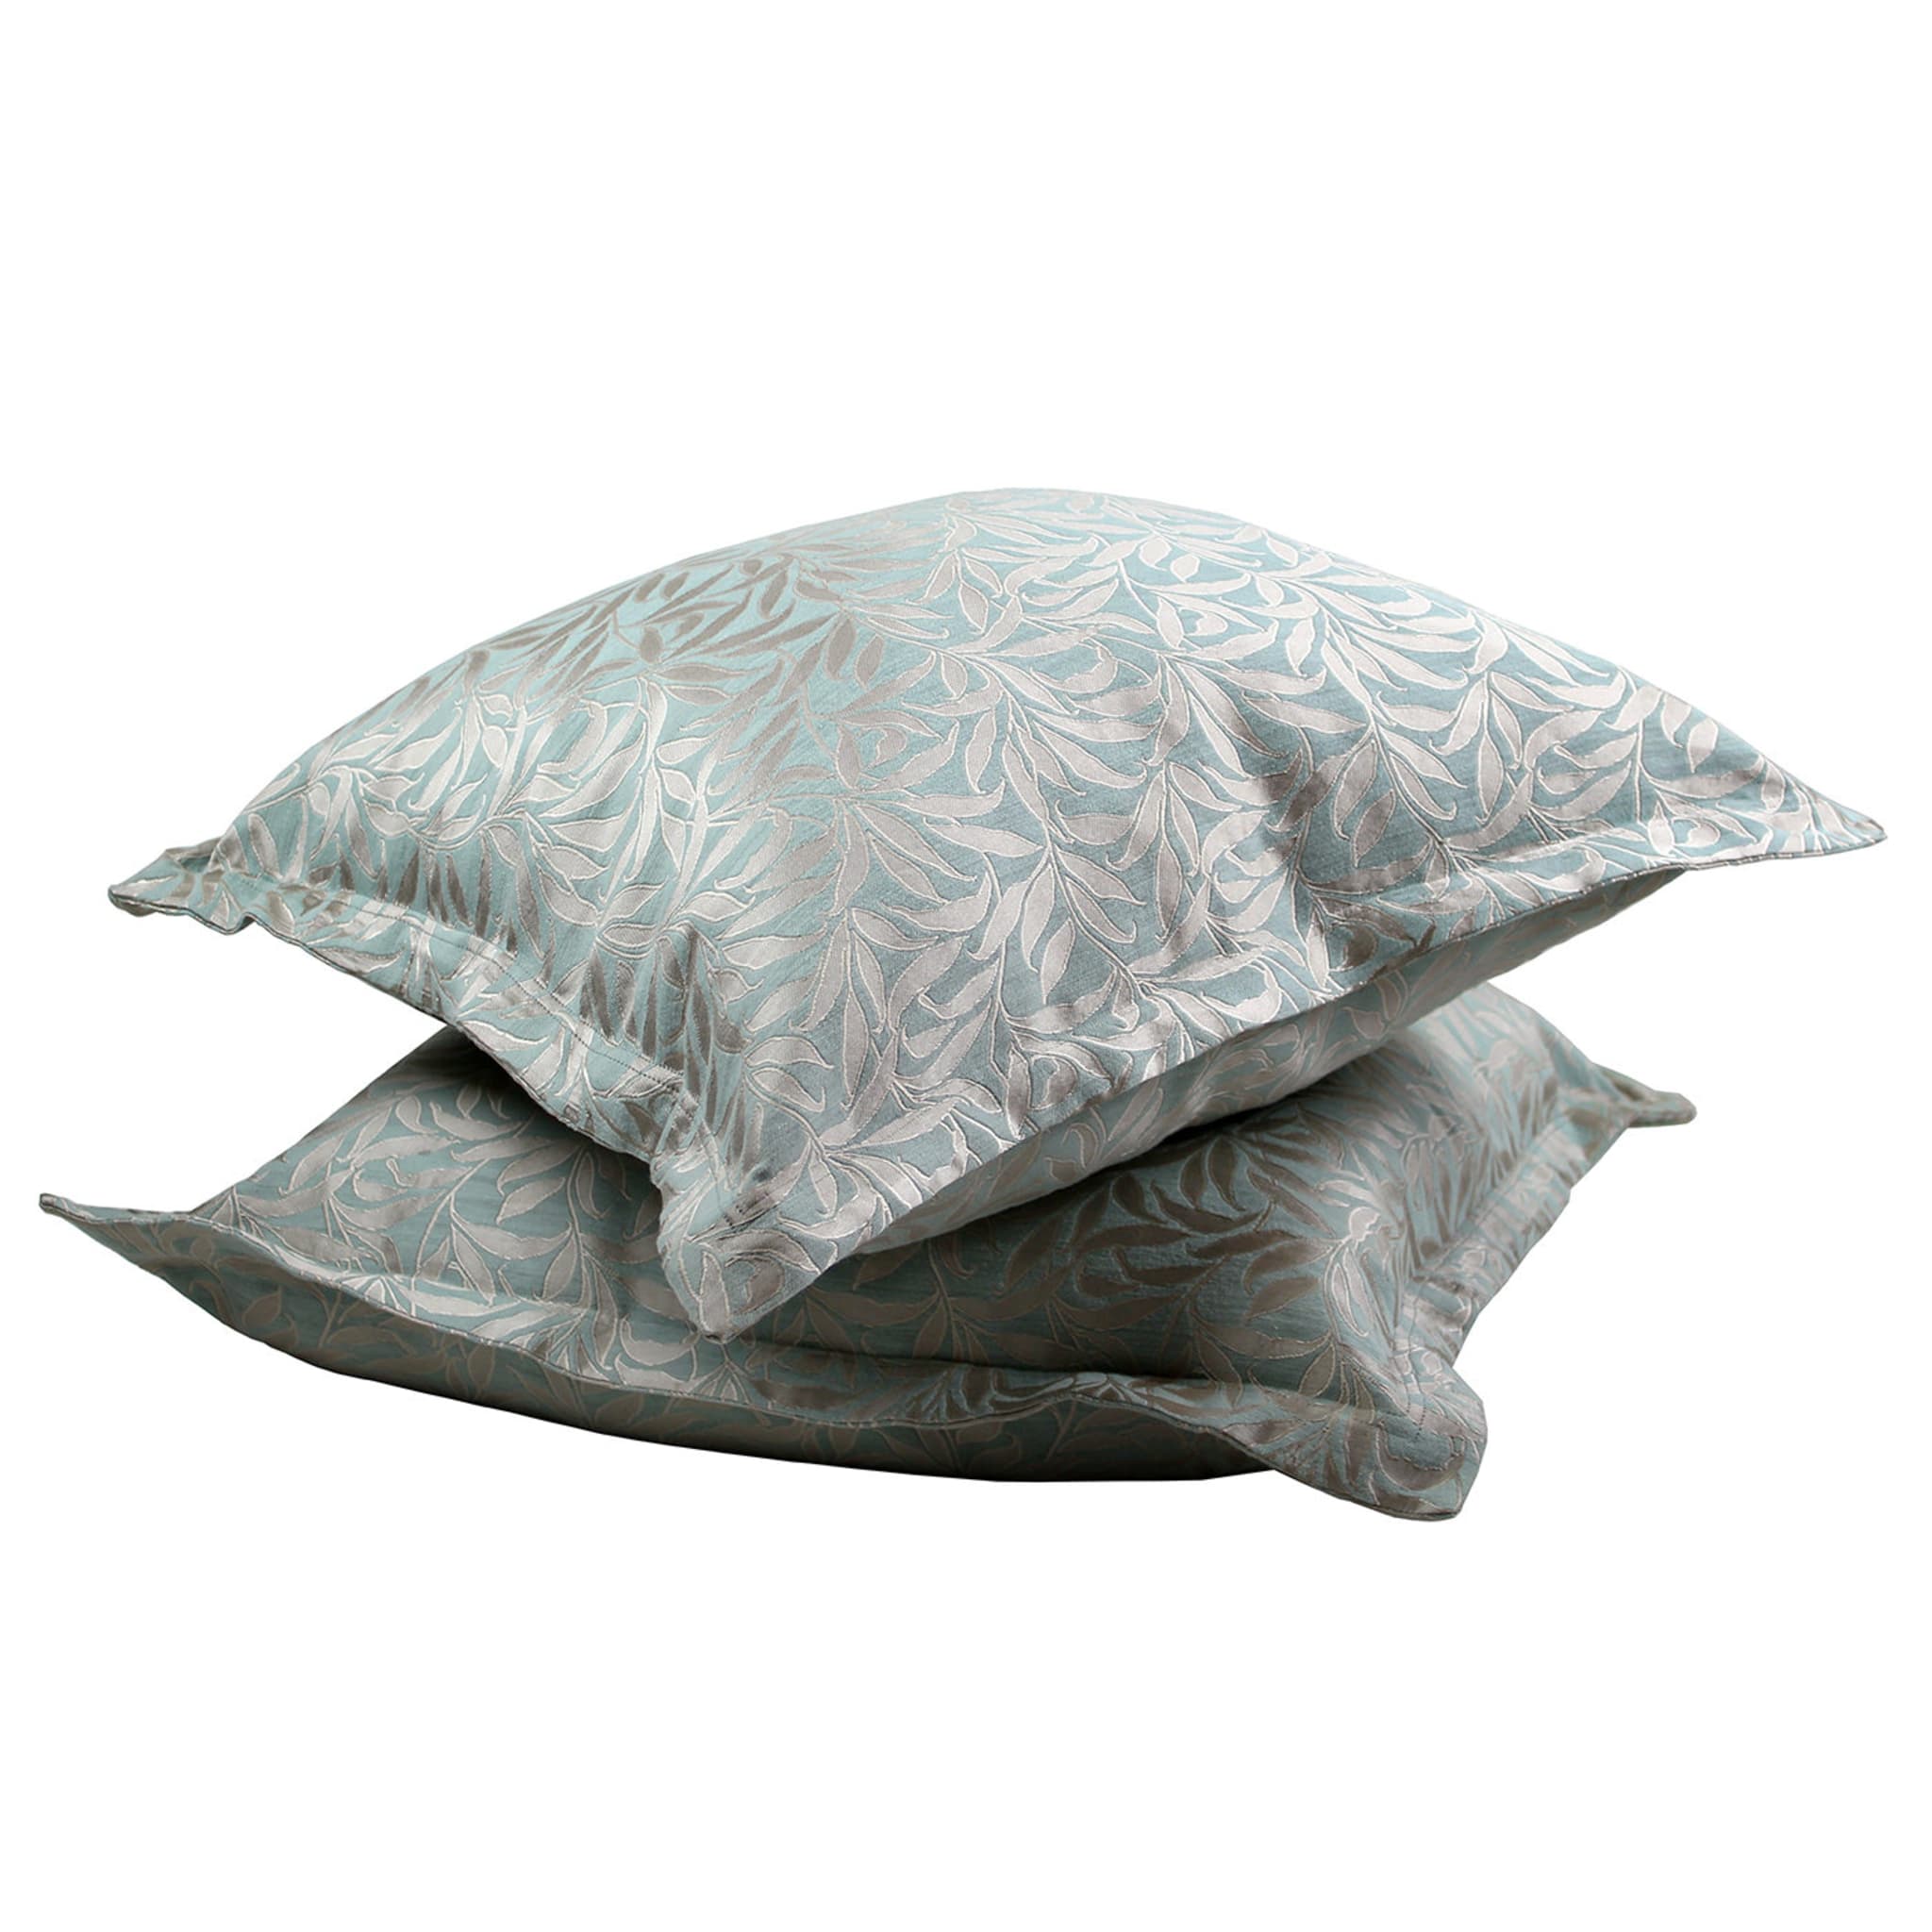 Set of 2 Silver Leaves Throw Cushions  - Alternative view 1